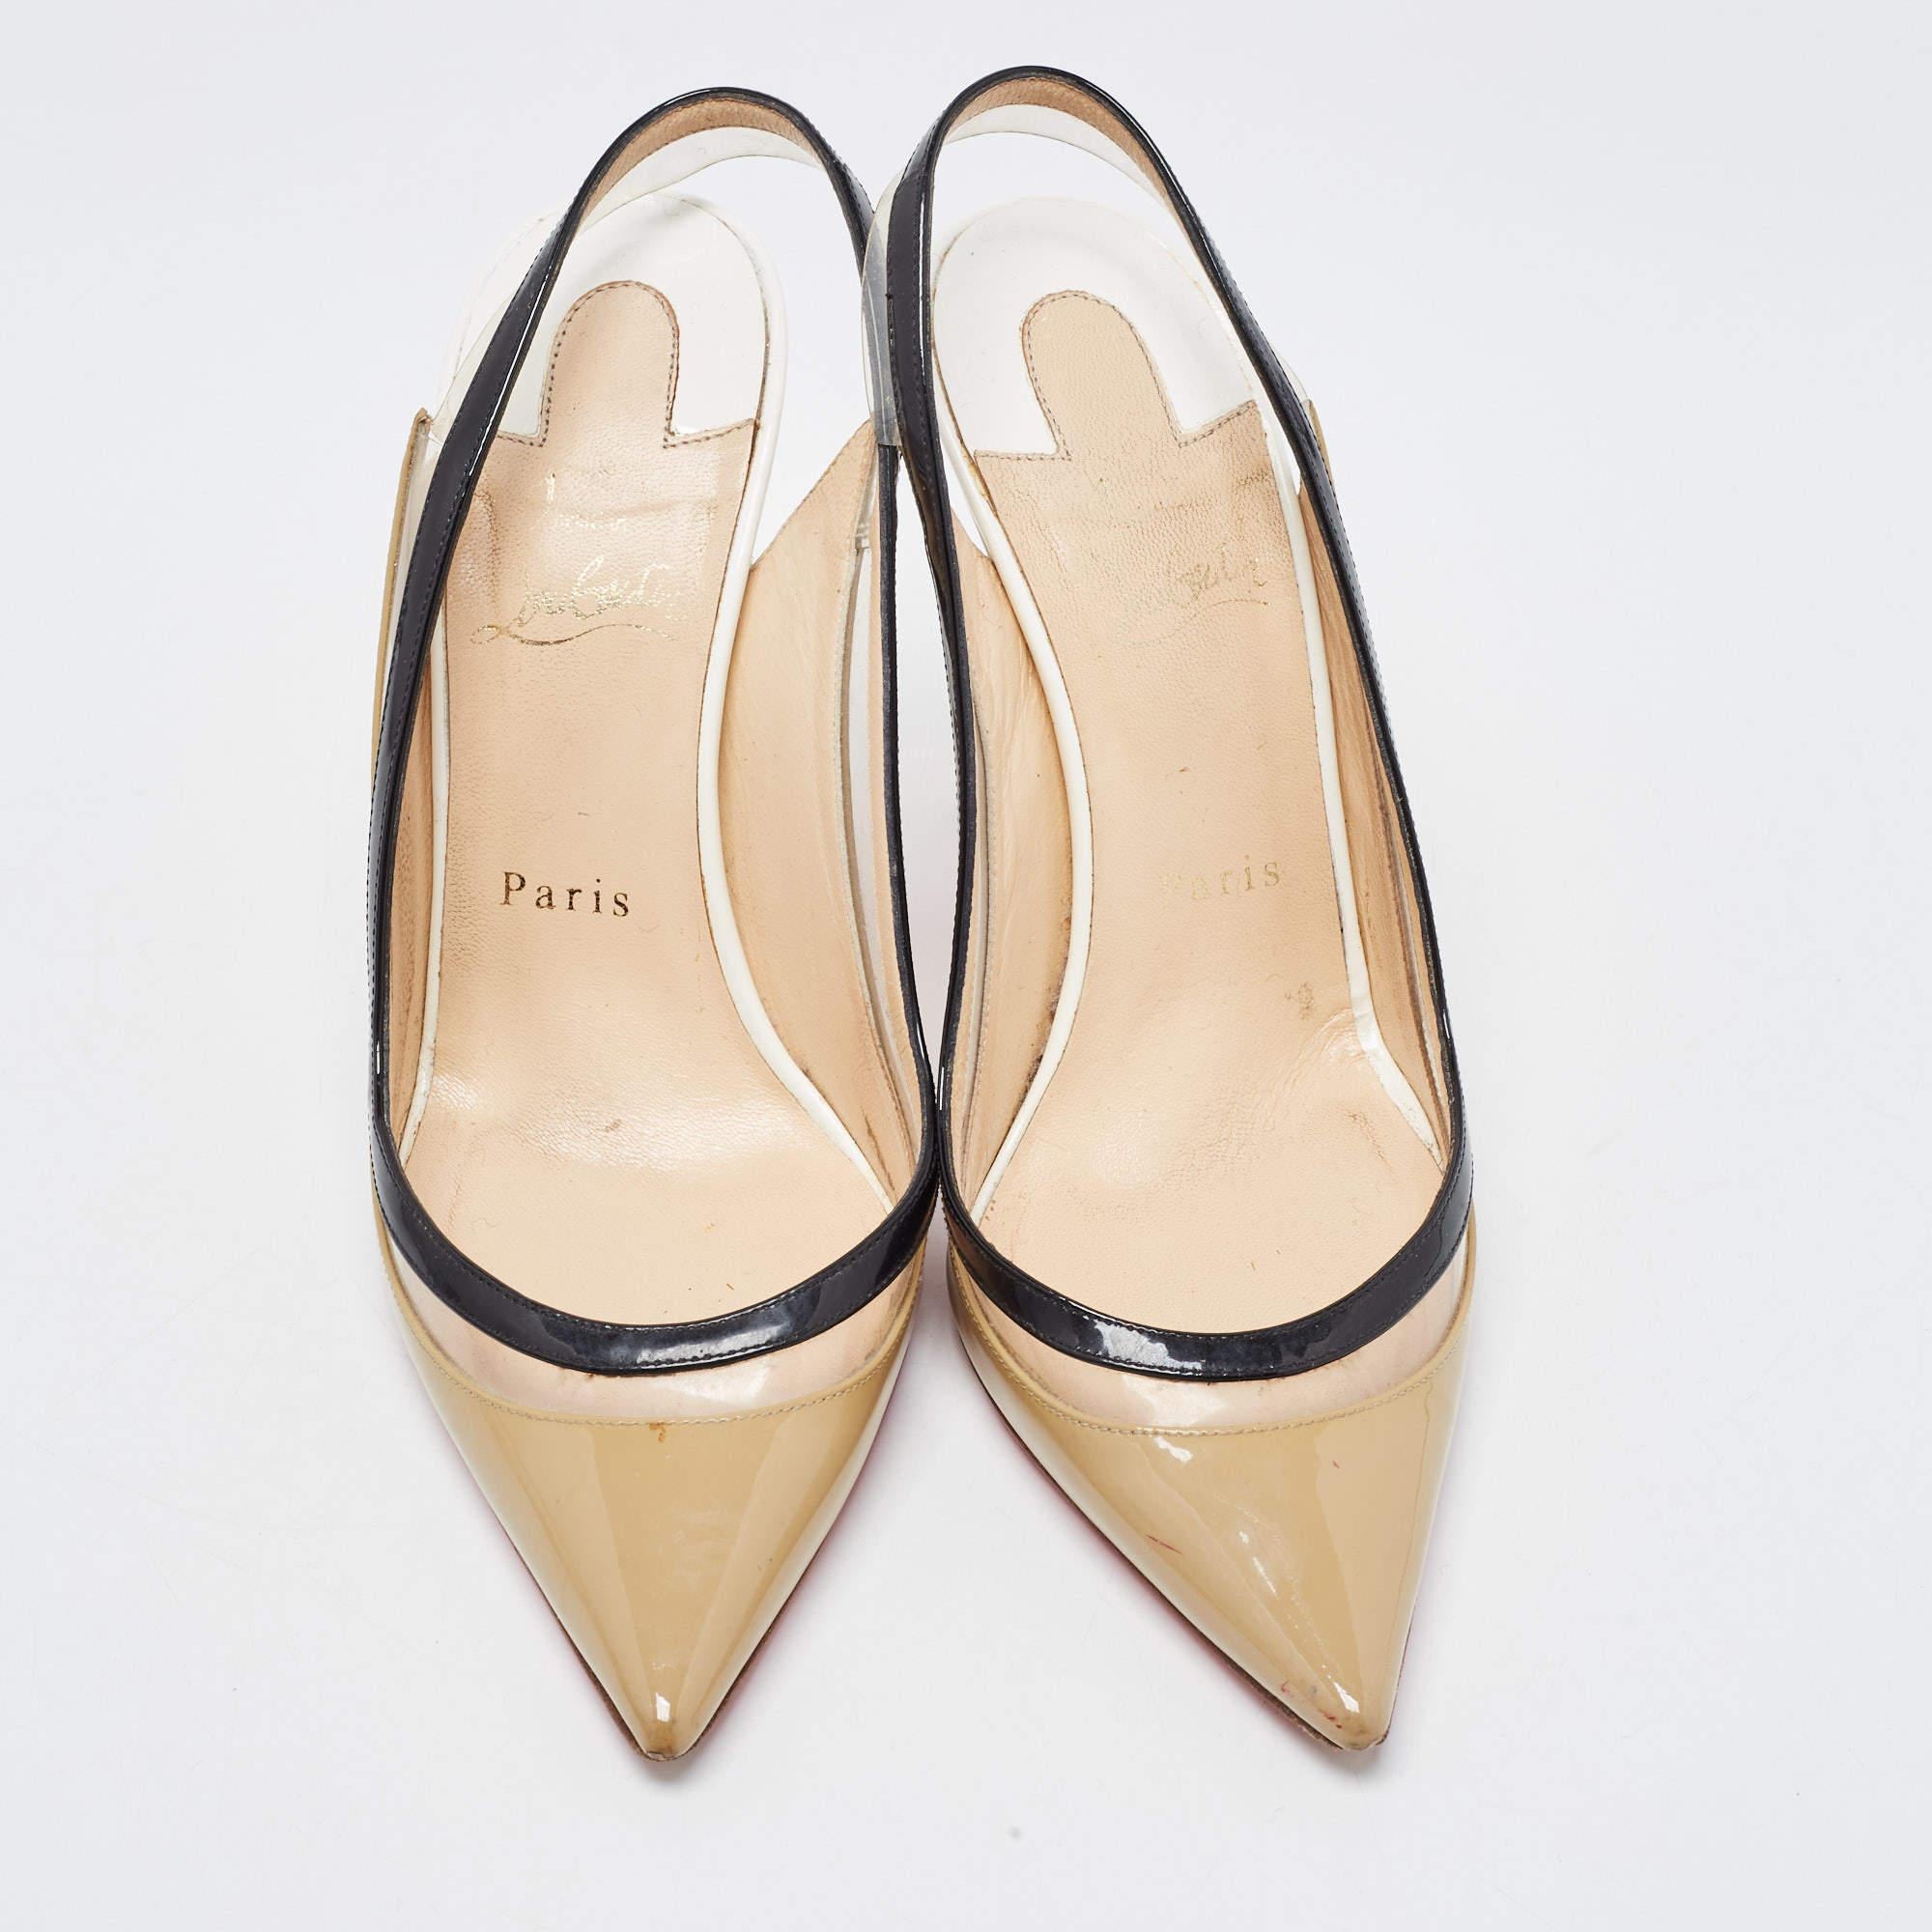 Beige Christian Louboutin Tricolor Patent Leather and PVC Paulina Slingback Pumps Size For Sale